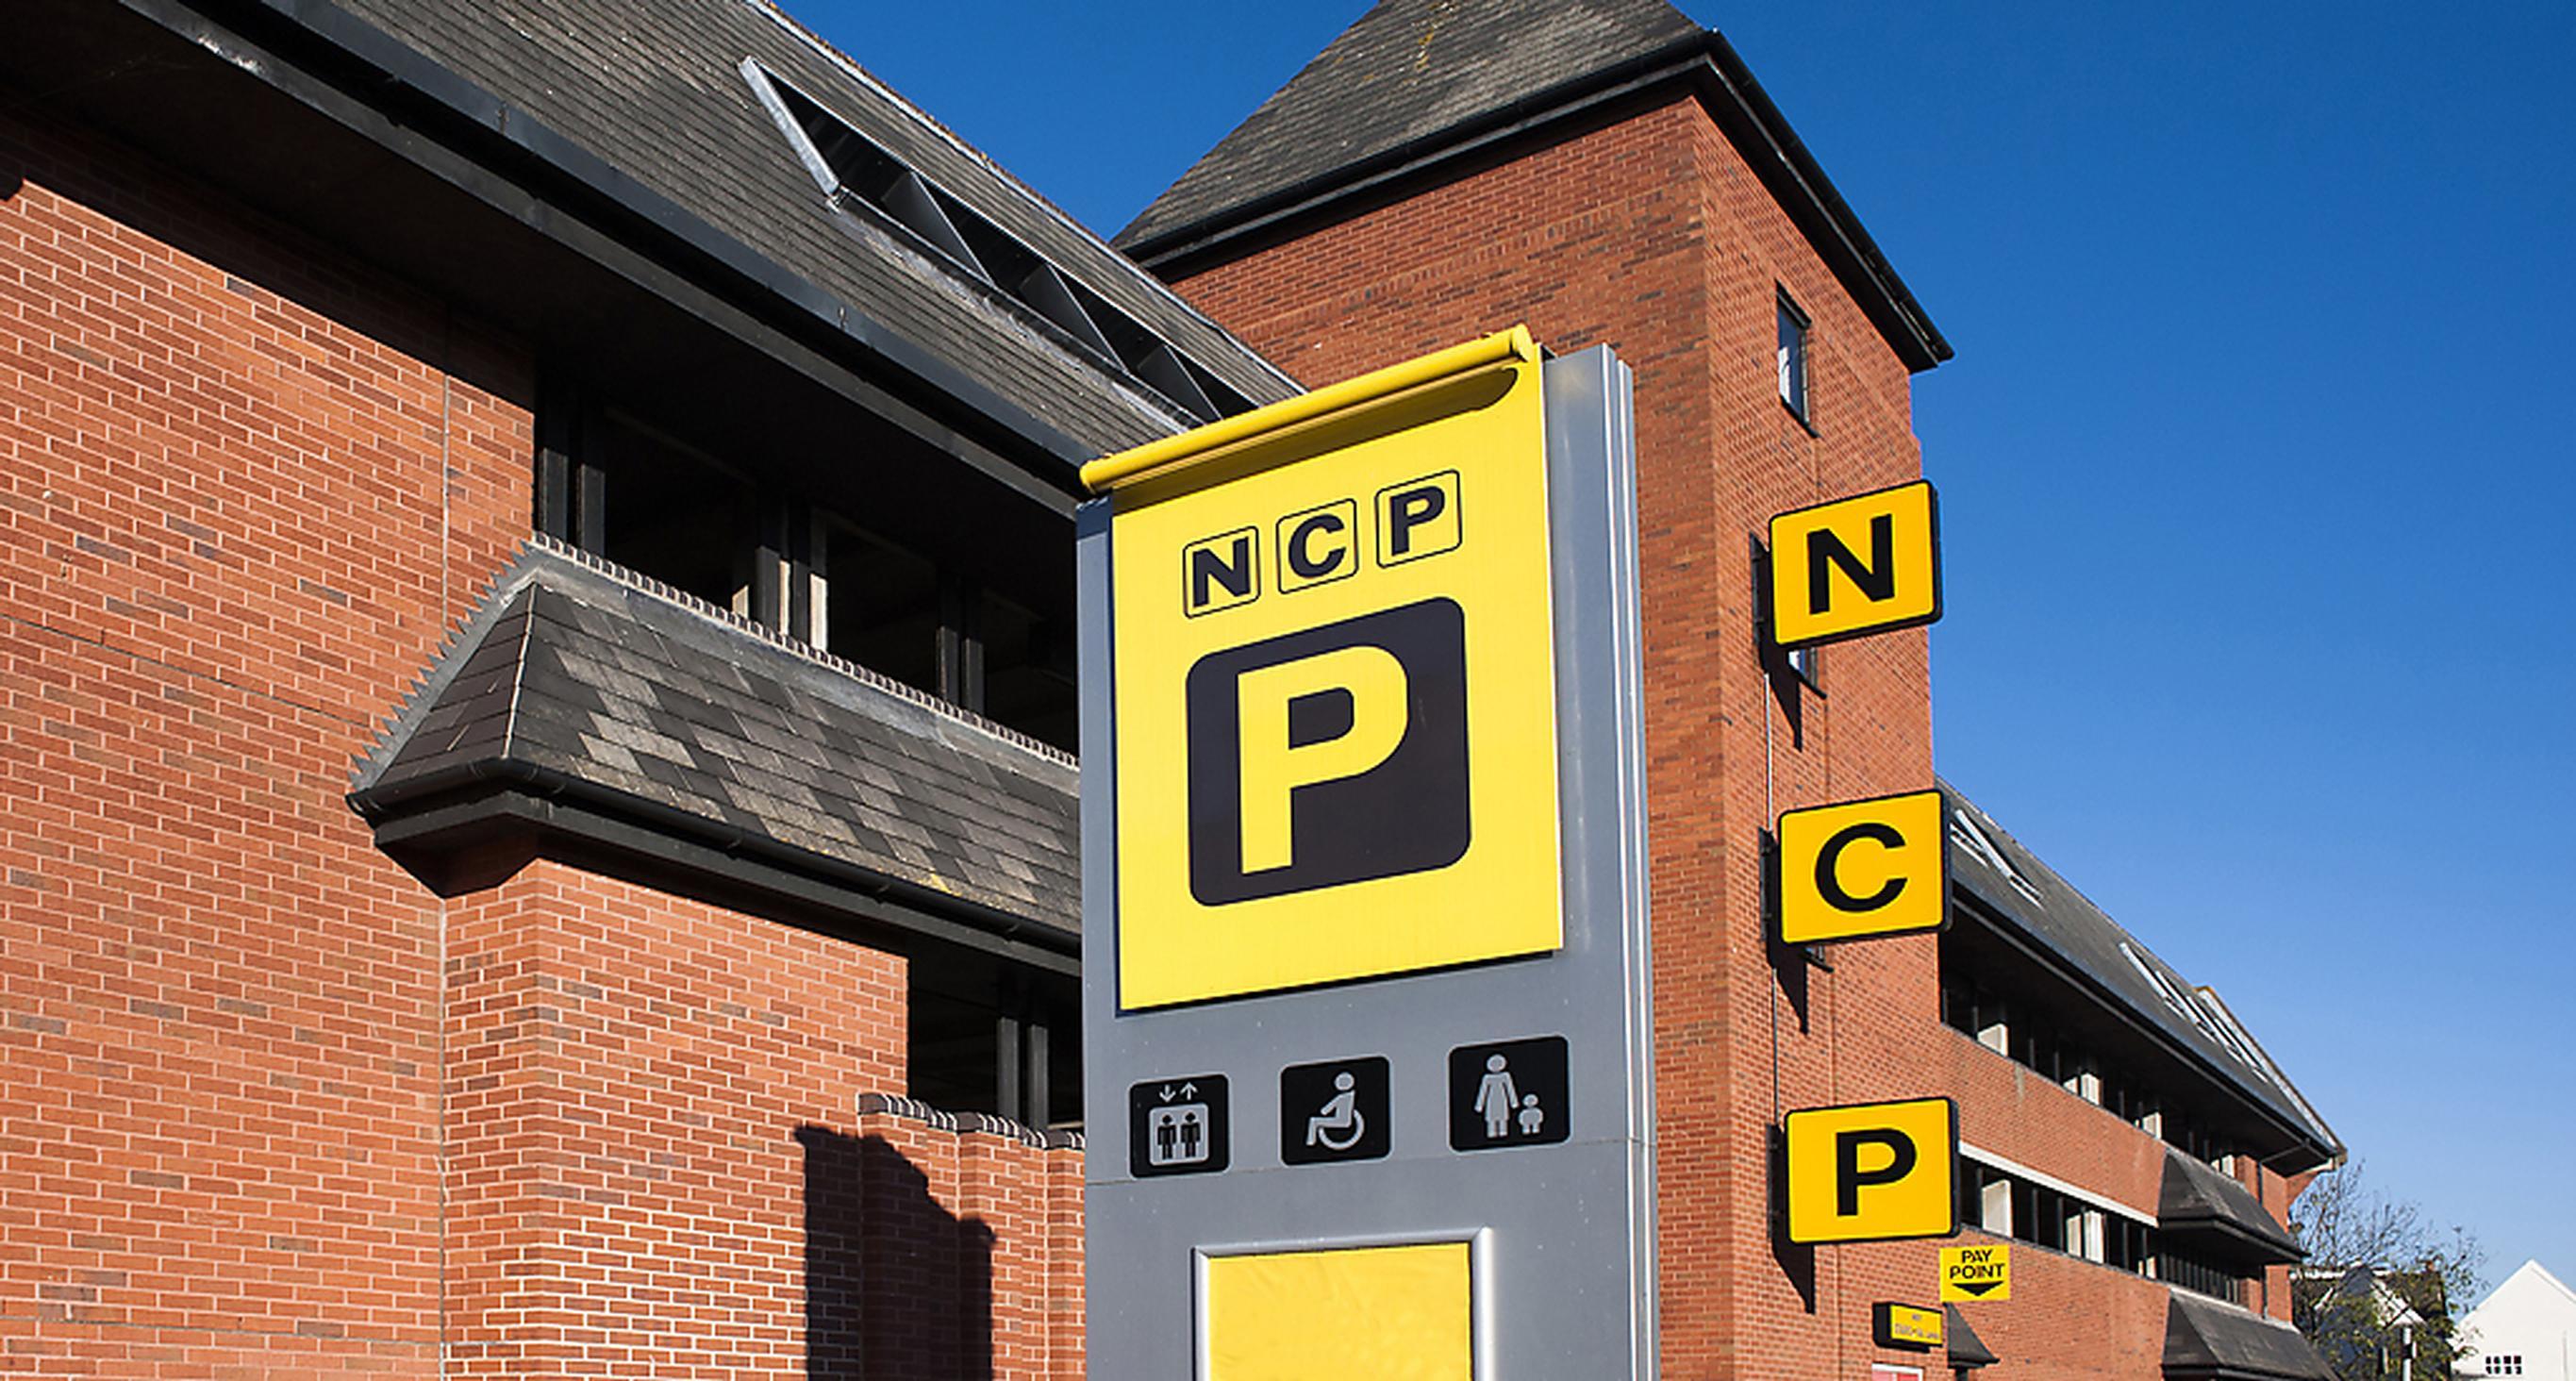 NCP is offering free parking at sites where it controls tariffs